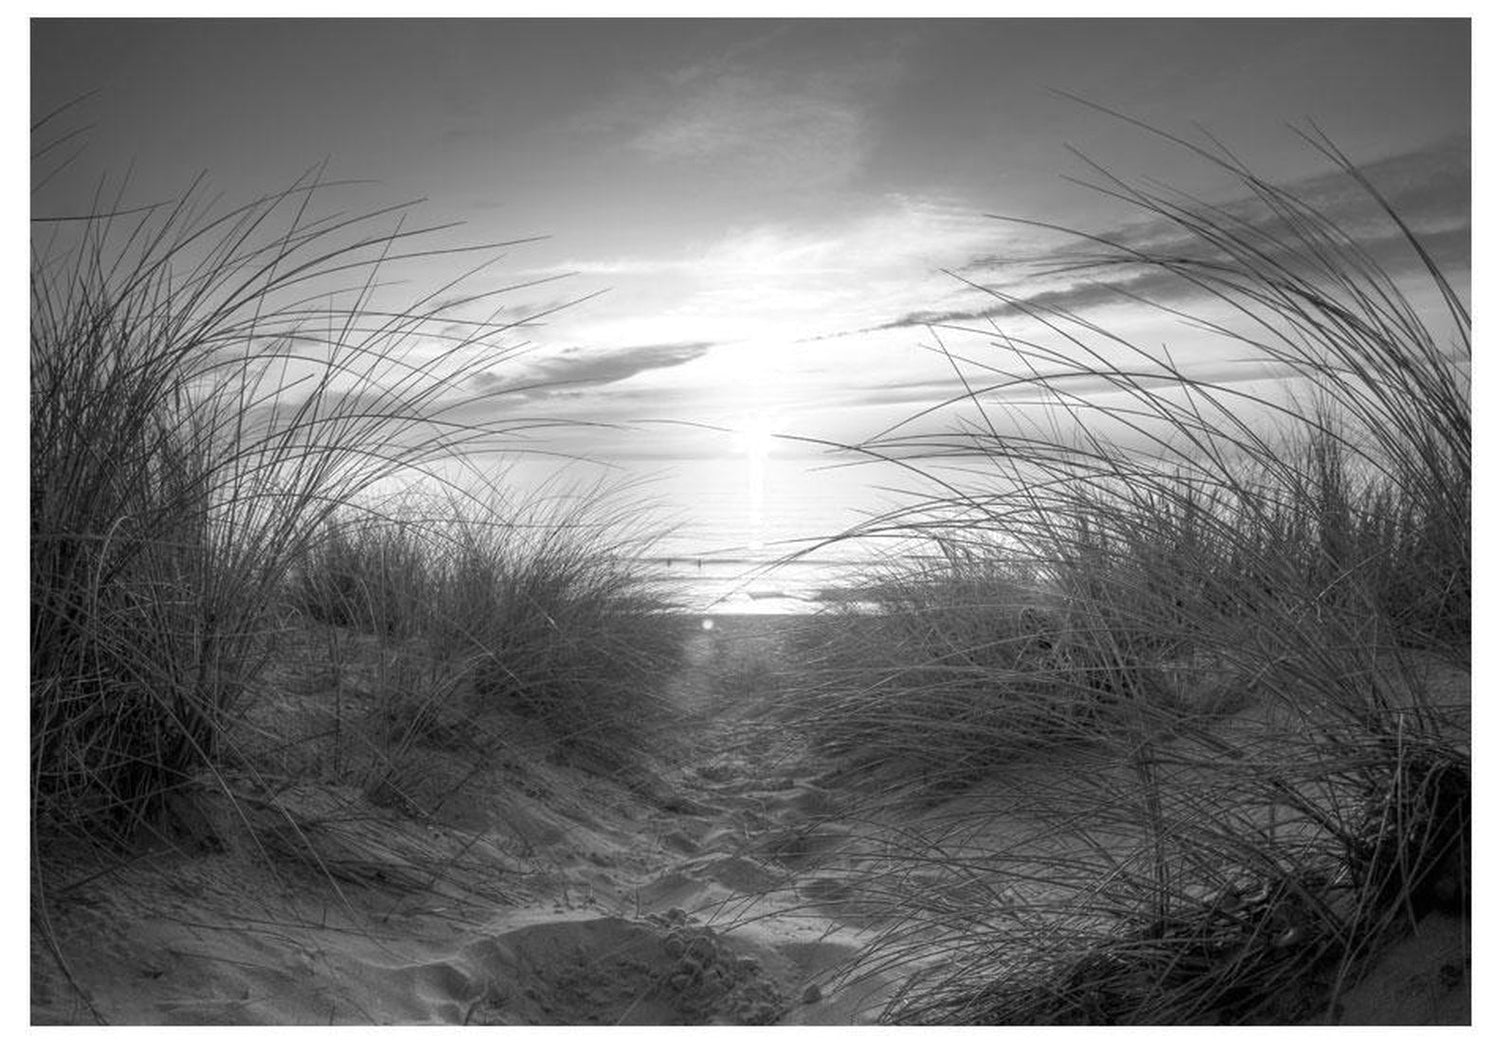 Peel and stick wall mural - beach (black and white)-TipTopHomeDecor